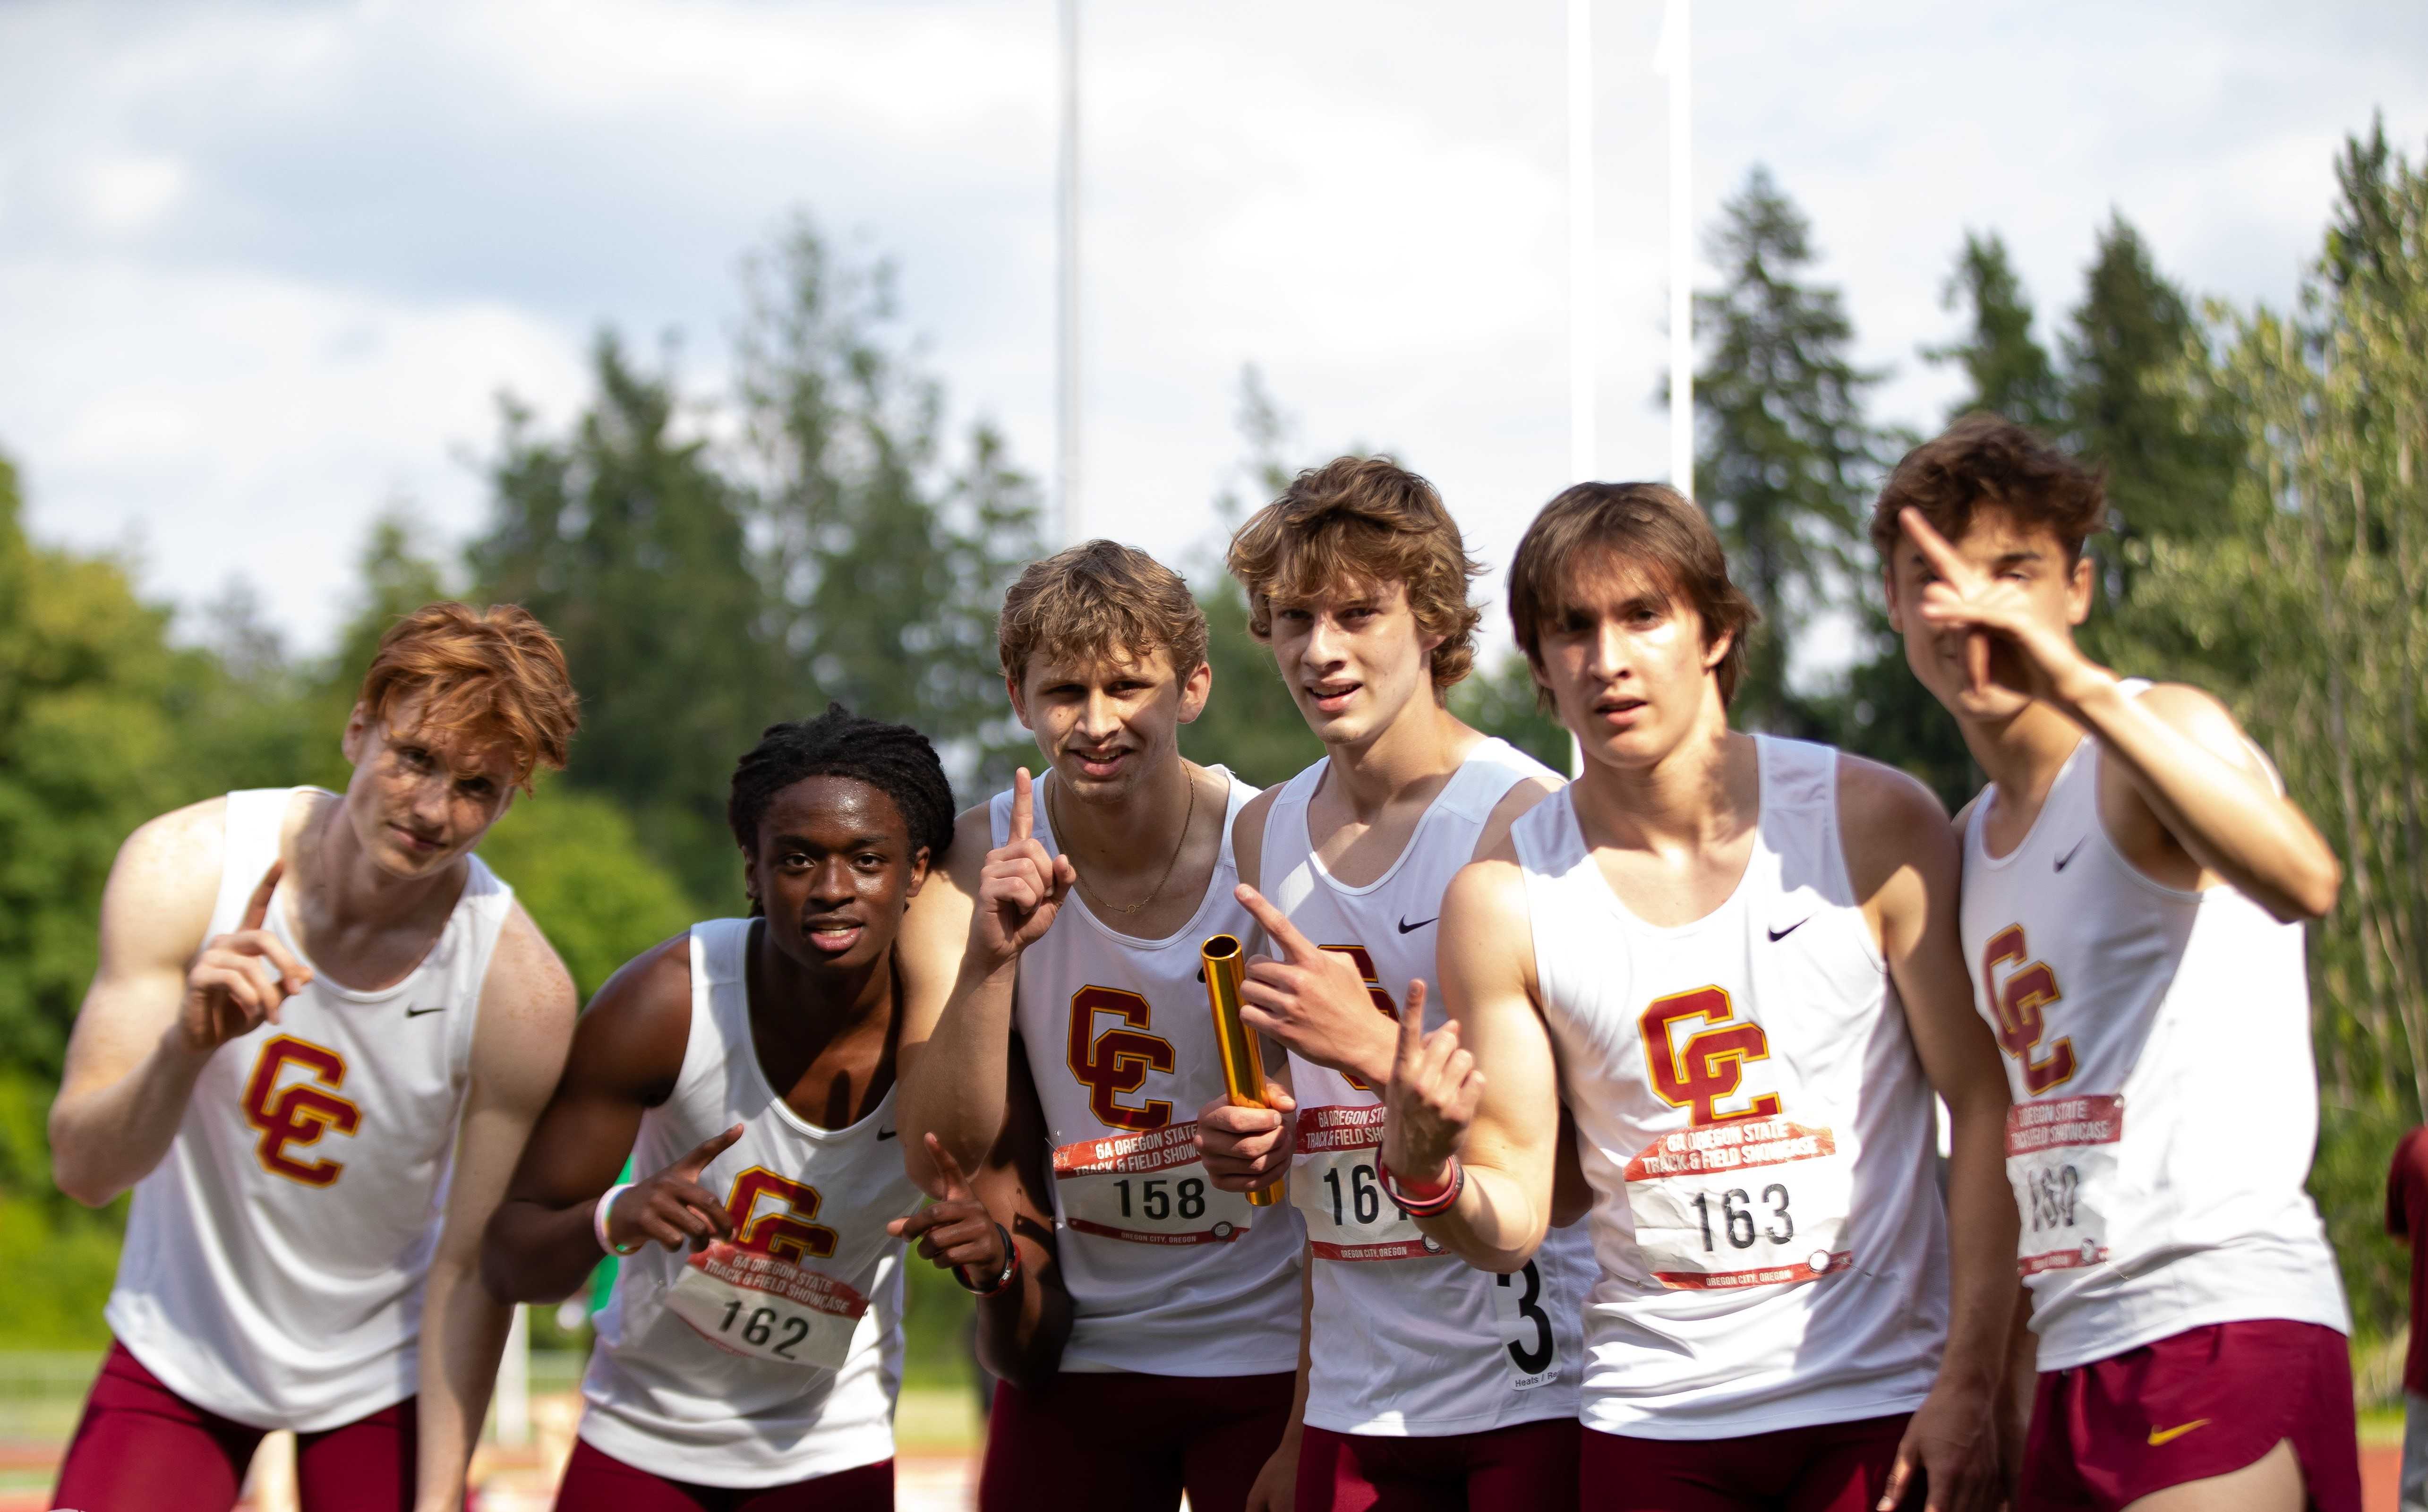 Central Catholic celebrates after winning the 4x400 relay in the 6A meet last season. (Photo by Jordan Beckett)